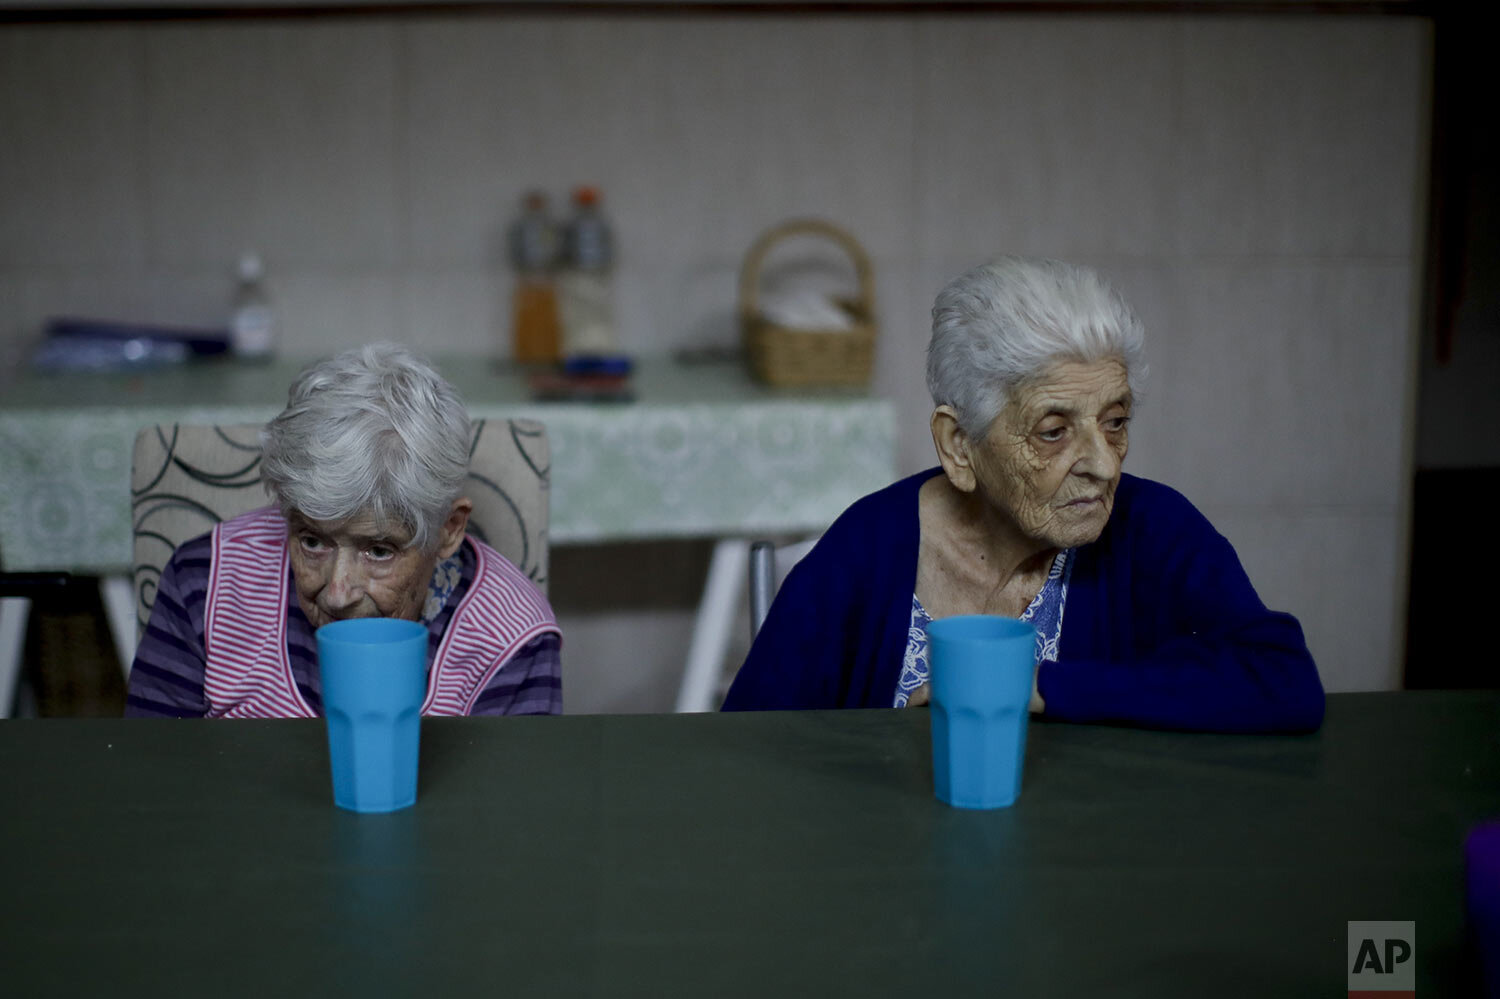  Elderly women rest at a table during a pause between activities at the Reminiscencias residence for the elderly in Tandil, Argentina, Sunday, April 4, 2021. (AP Photo/Natacha Pisarenko) 